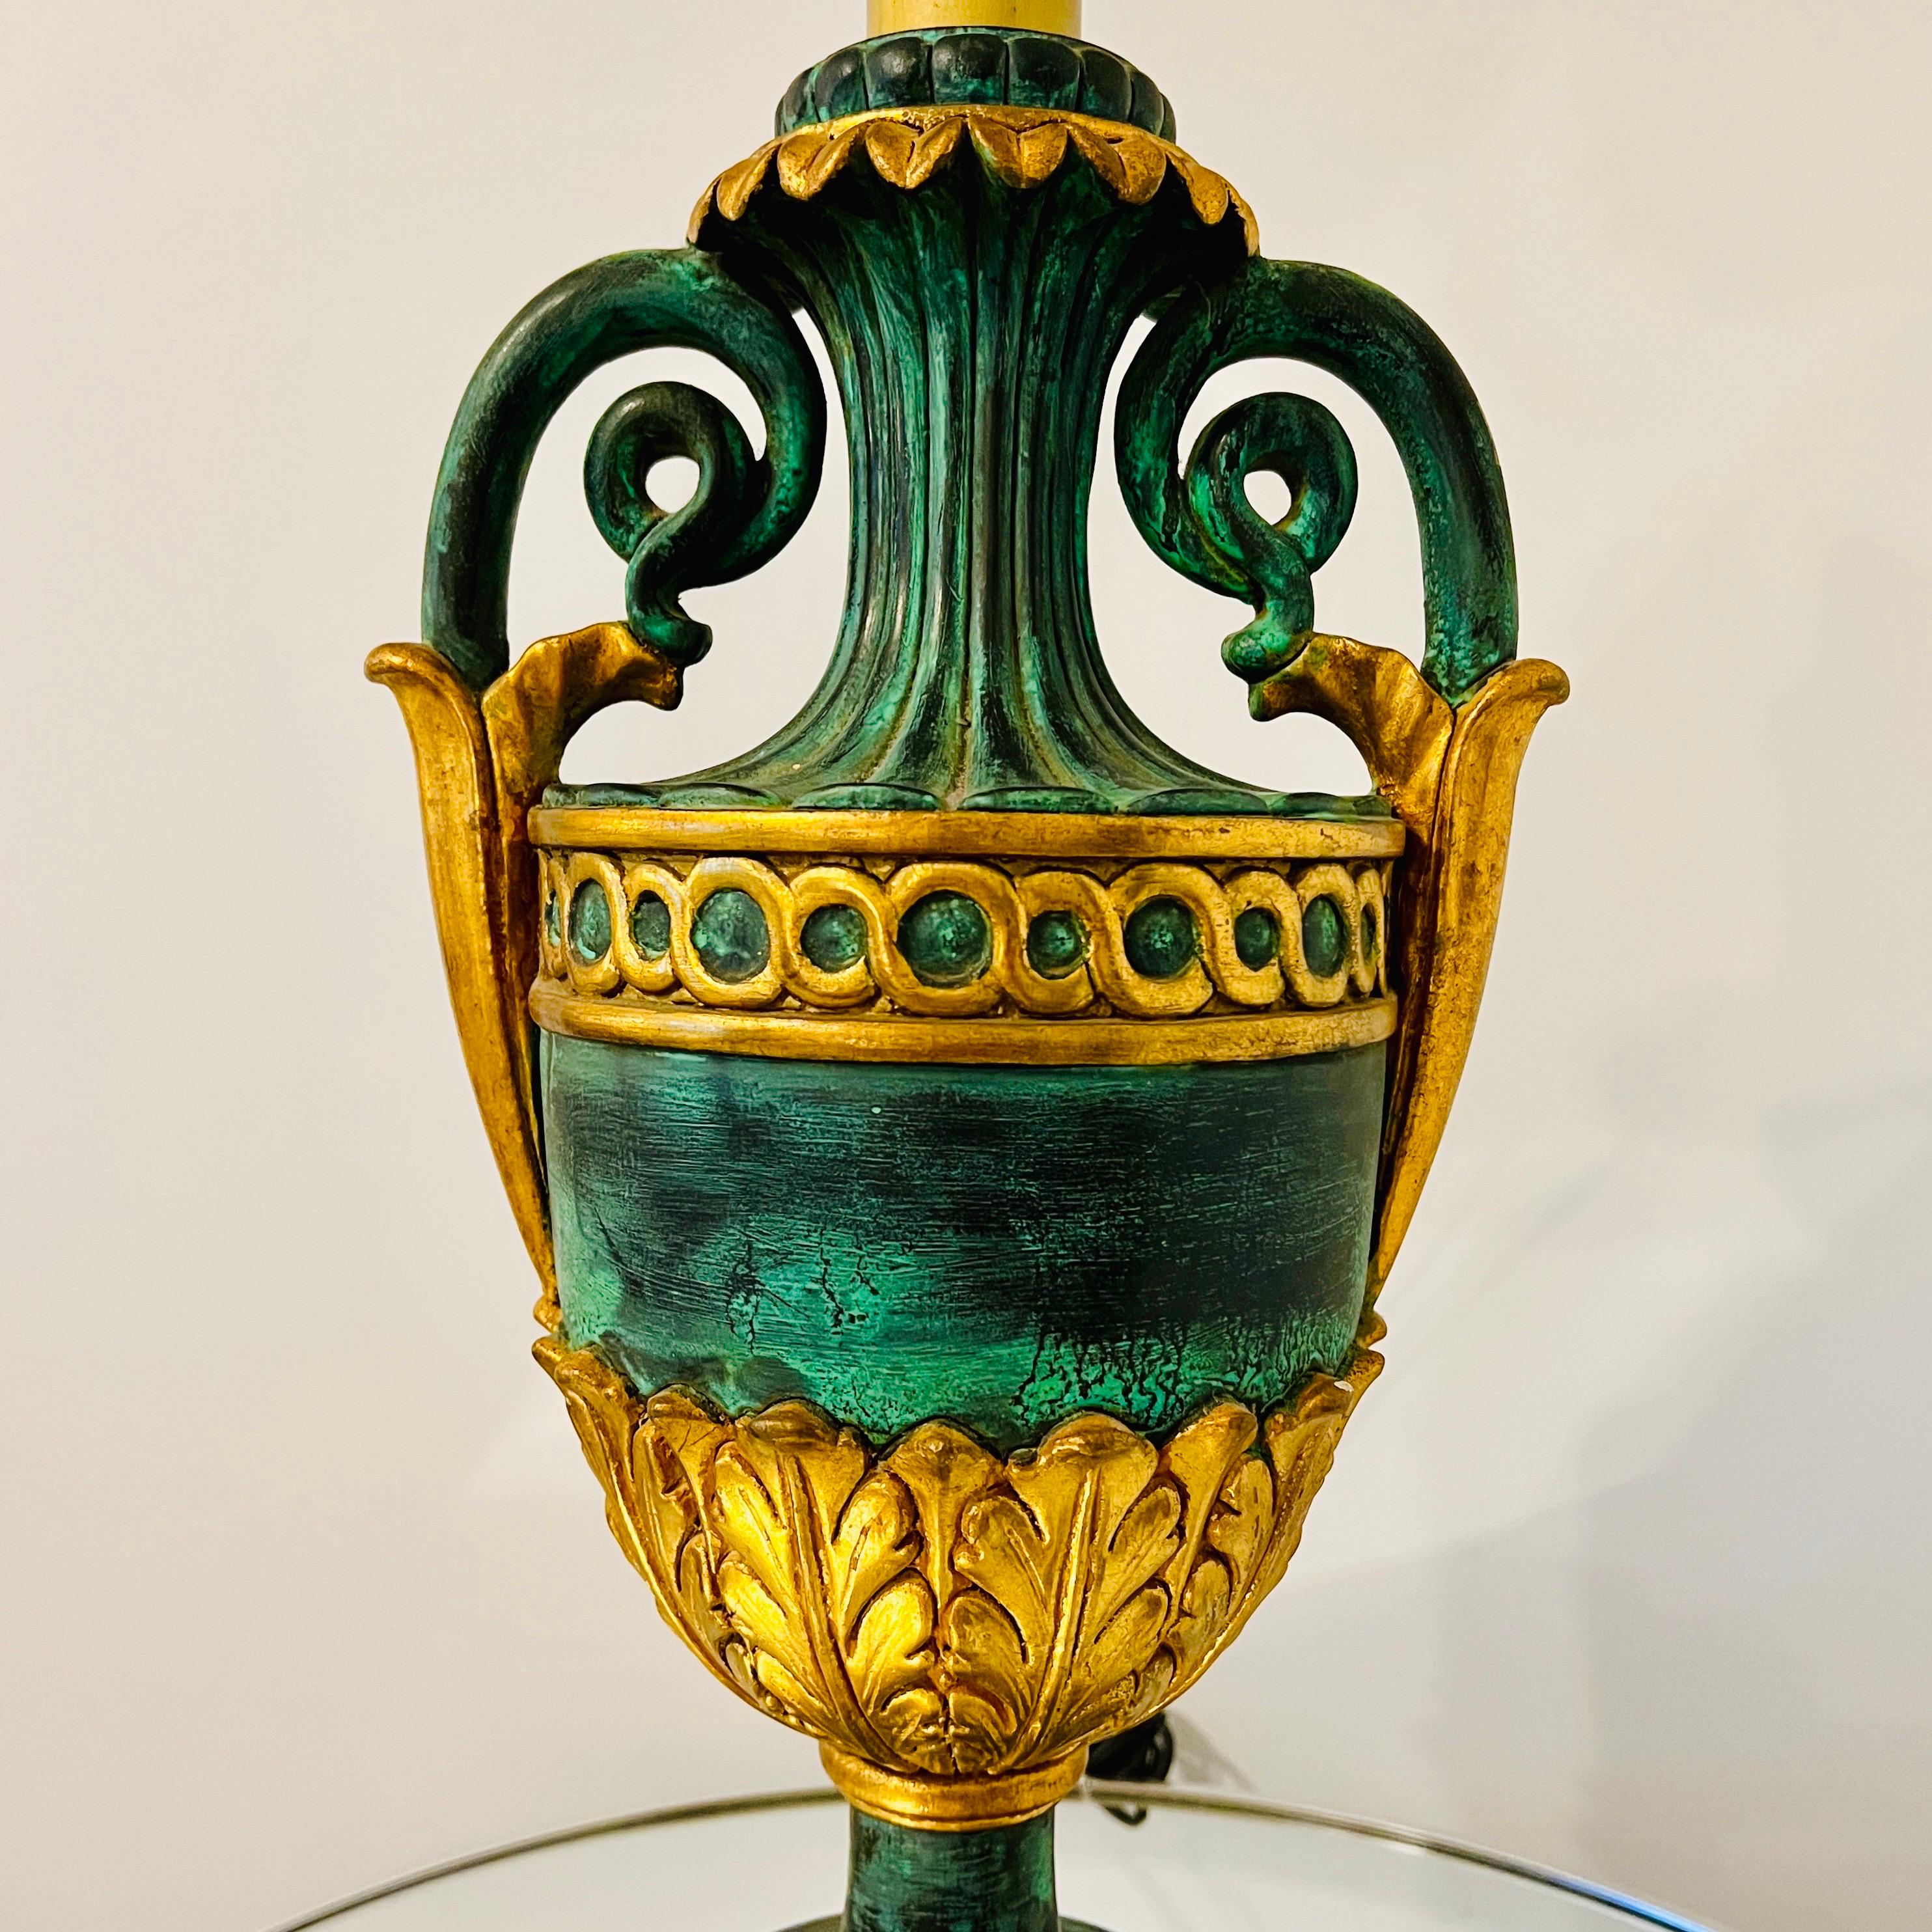 Neoclassical urn lamp in giltwood with hand-painted verdigris faux finish. Features highly stylized hand-carved designs with fluted details, scrolled handles,   gilded laurel leaf accents ,and gold circles.  Base measures 7.5